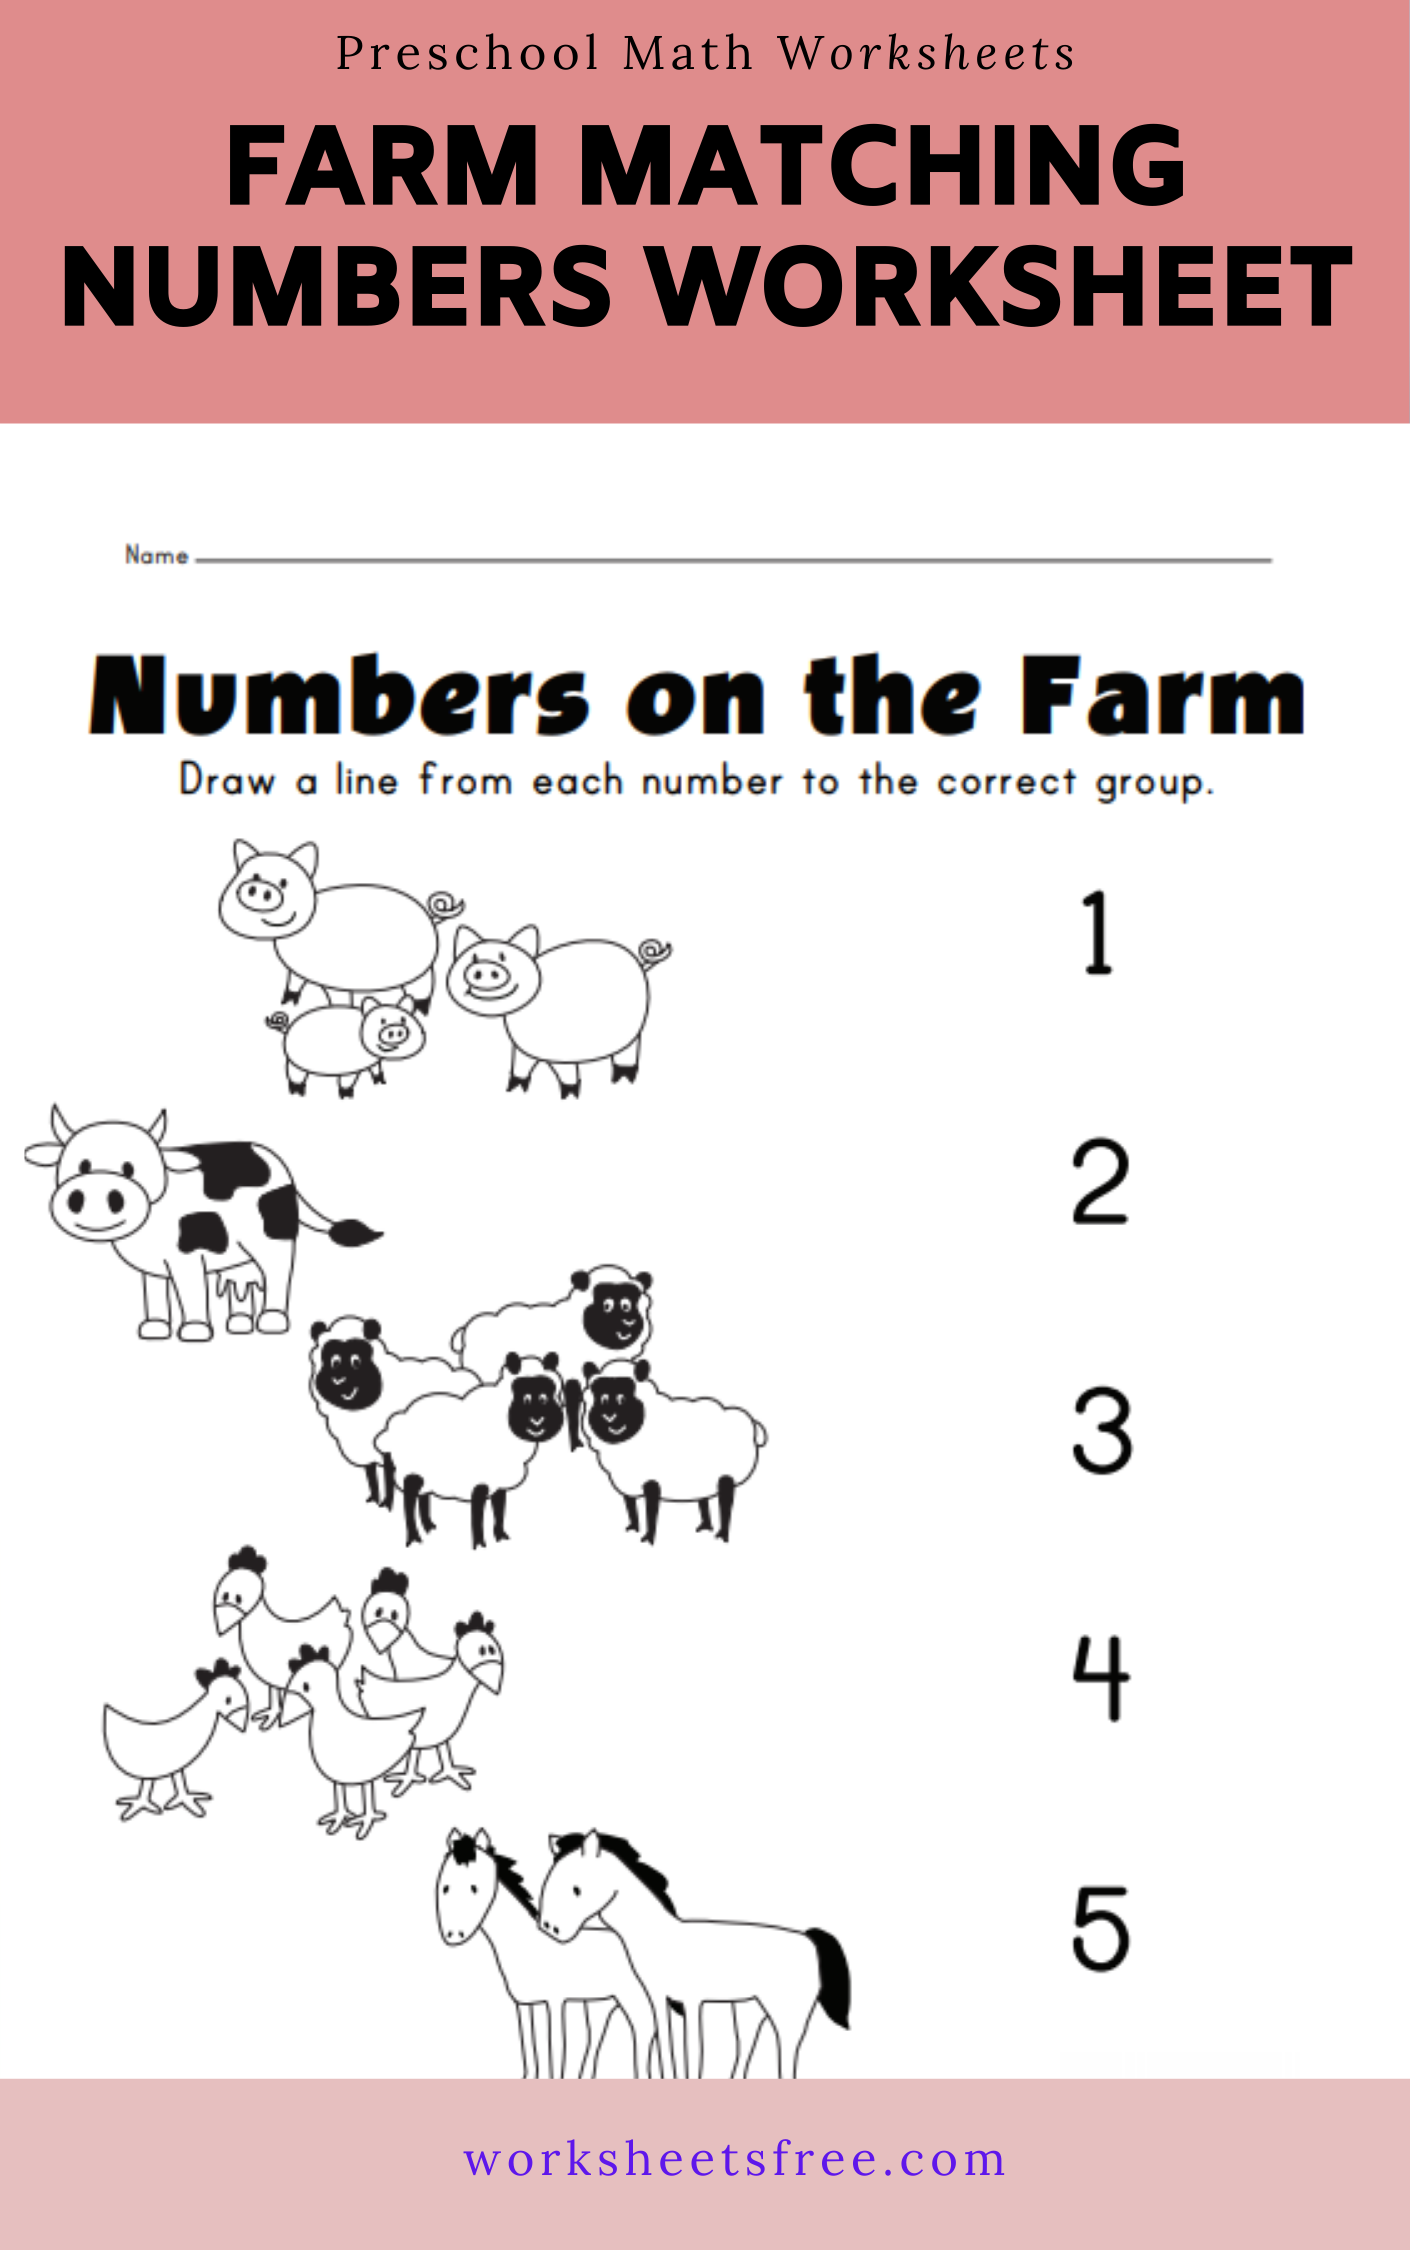 Farm animals worksheets for kids. Animals and numbers for Kids. Animals Worksheets Preschool. Farm animals Worksheets for Kids counting. Domestic animals Tracing Worksheets for Kids.